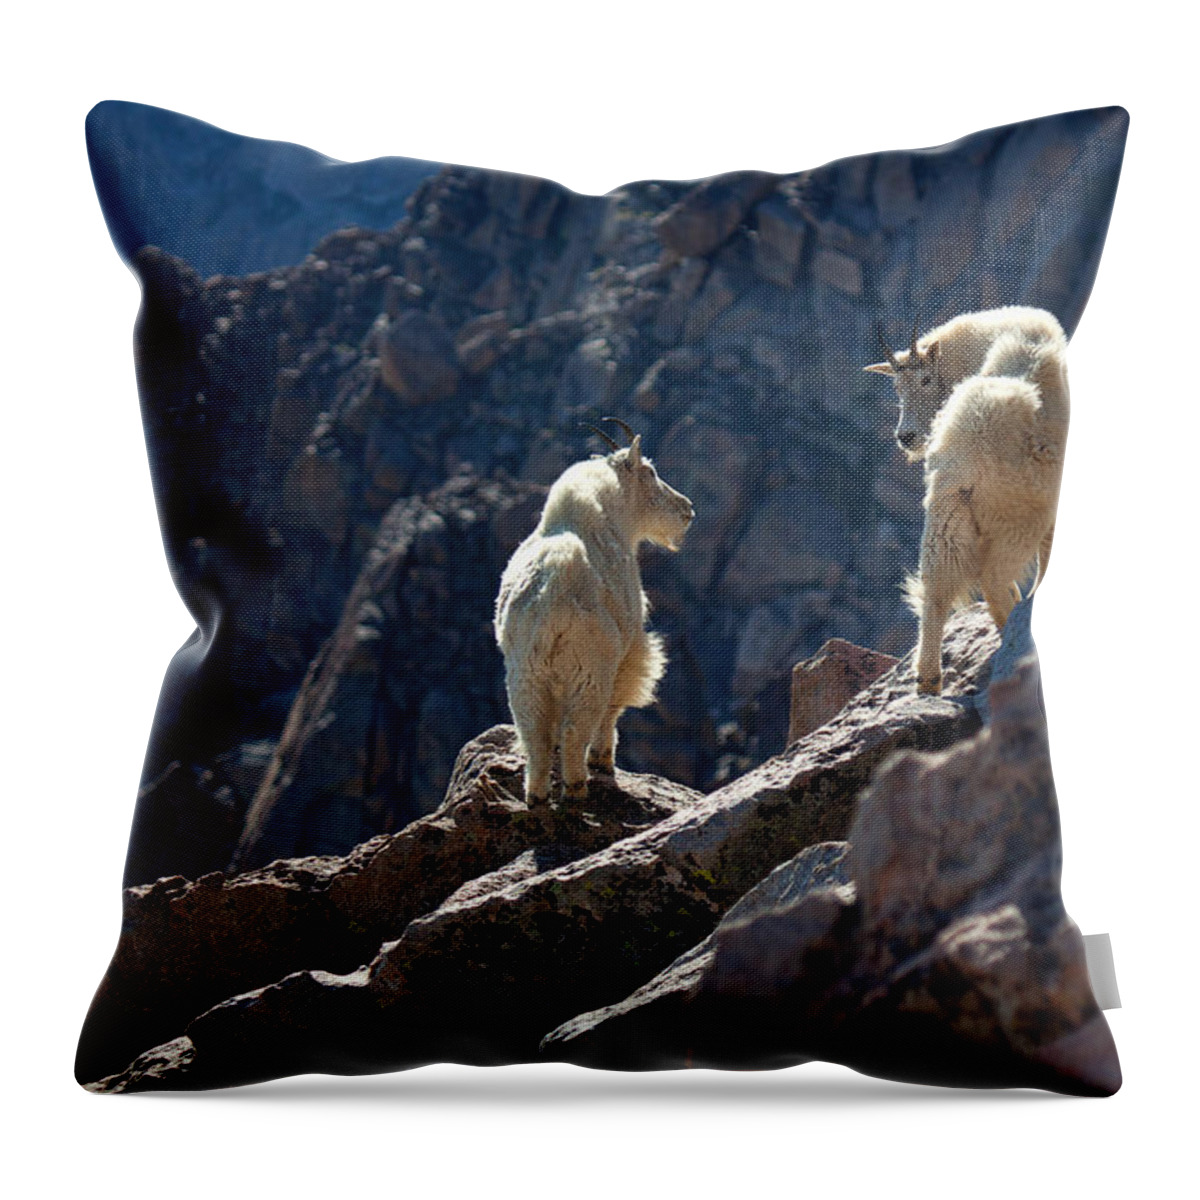 Mountain Goats; Posing; Group Photo; Baby Goat; Nature; Colorado; Crowd; Nature; Throw Pillow featuring the photograph The Mountaineers by Jim Garrison